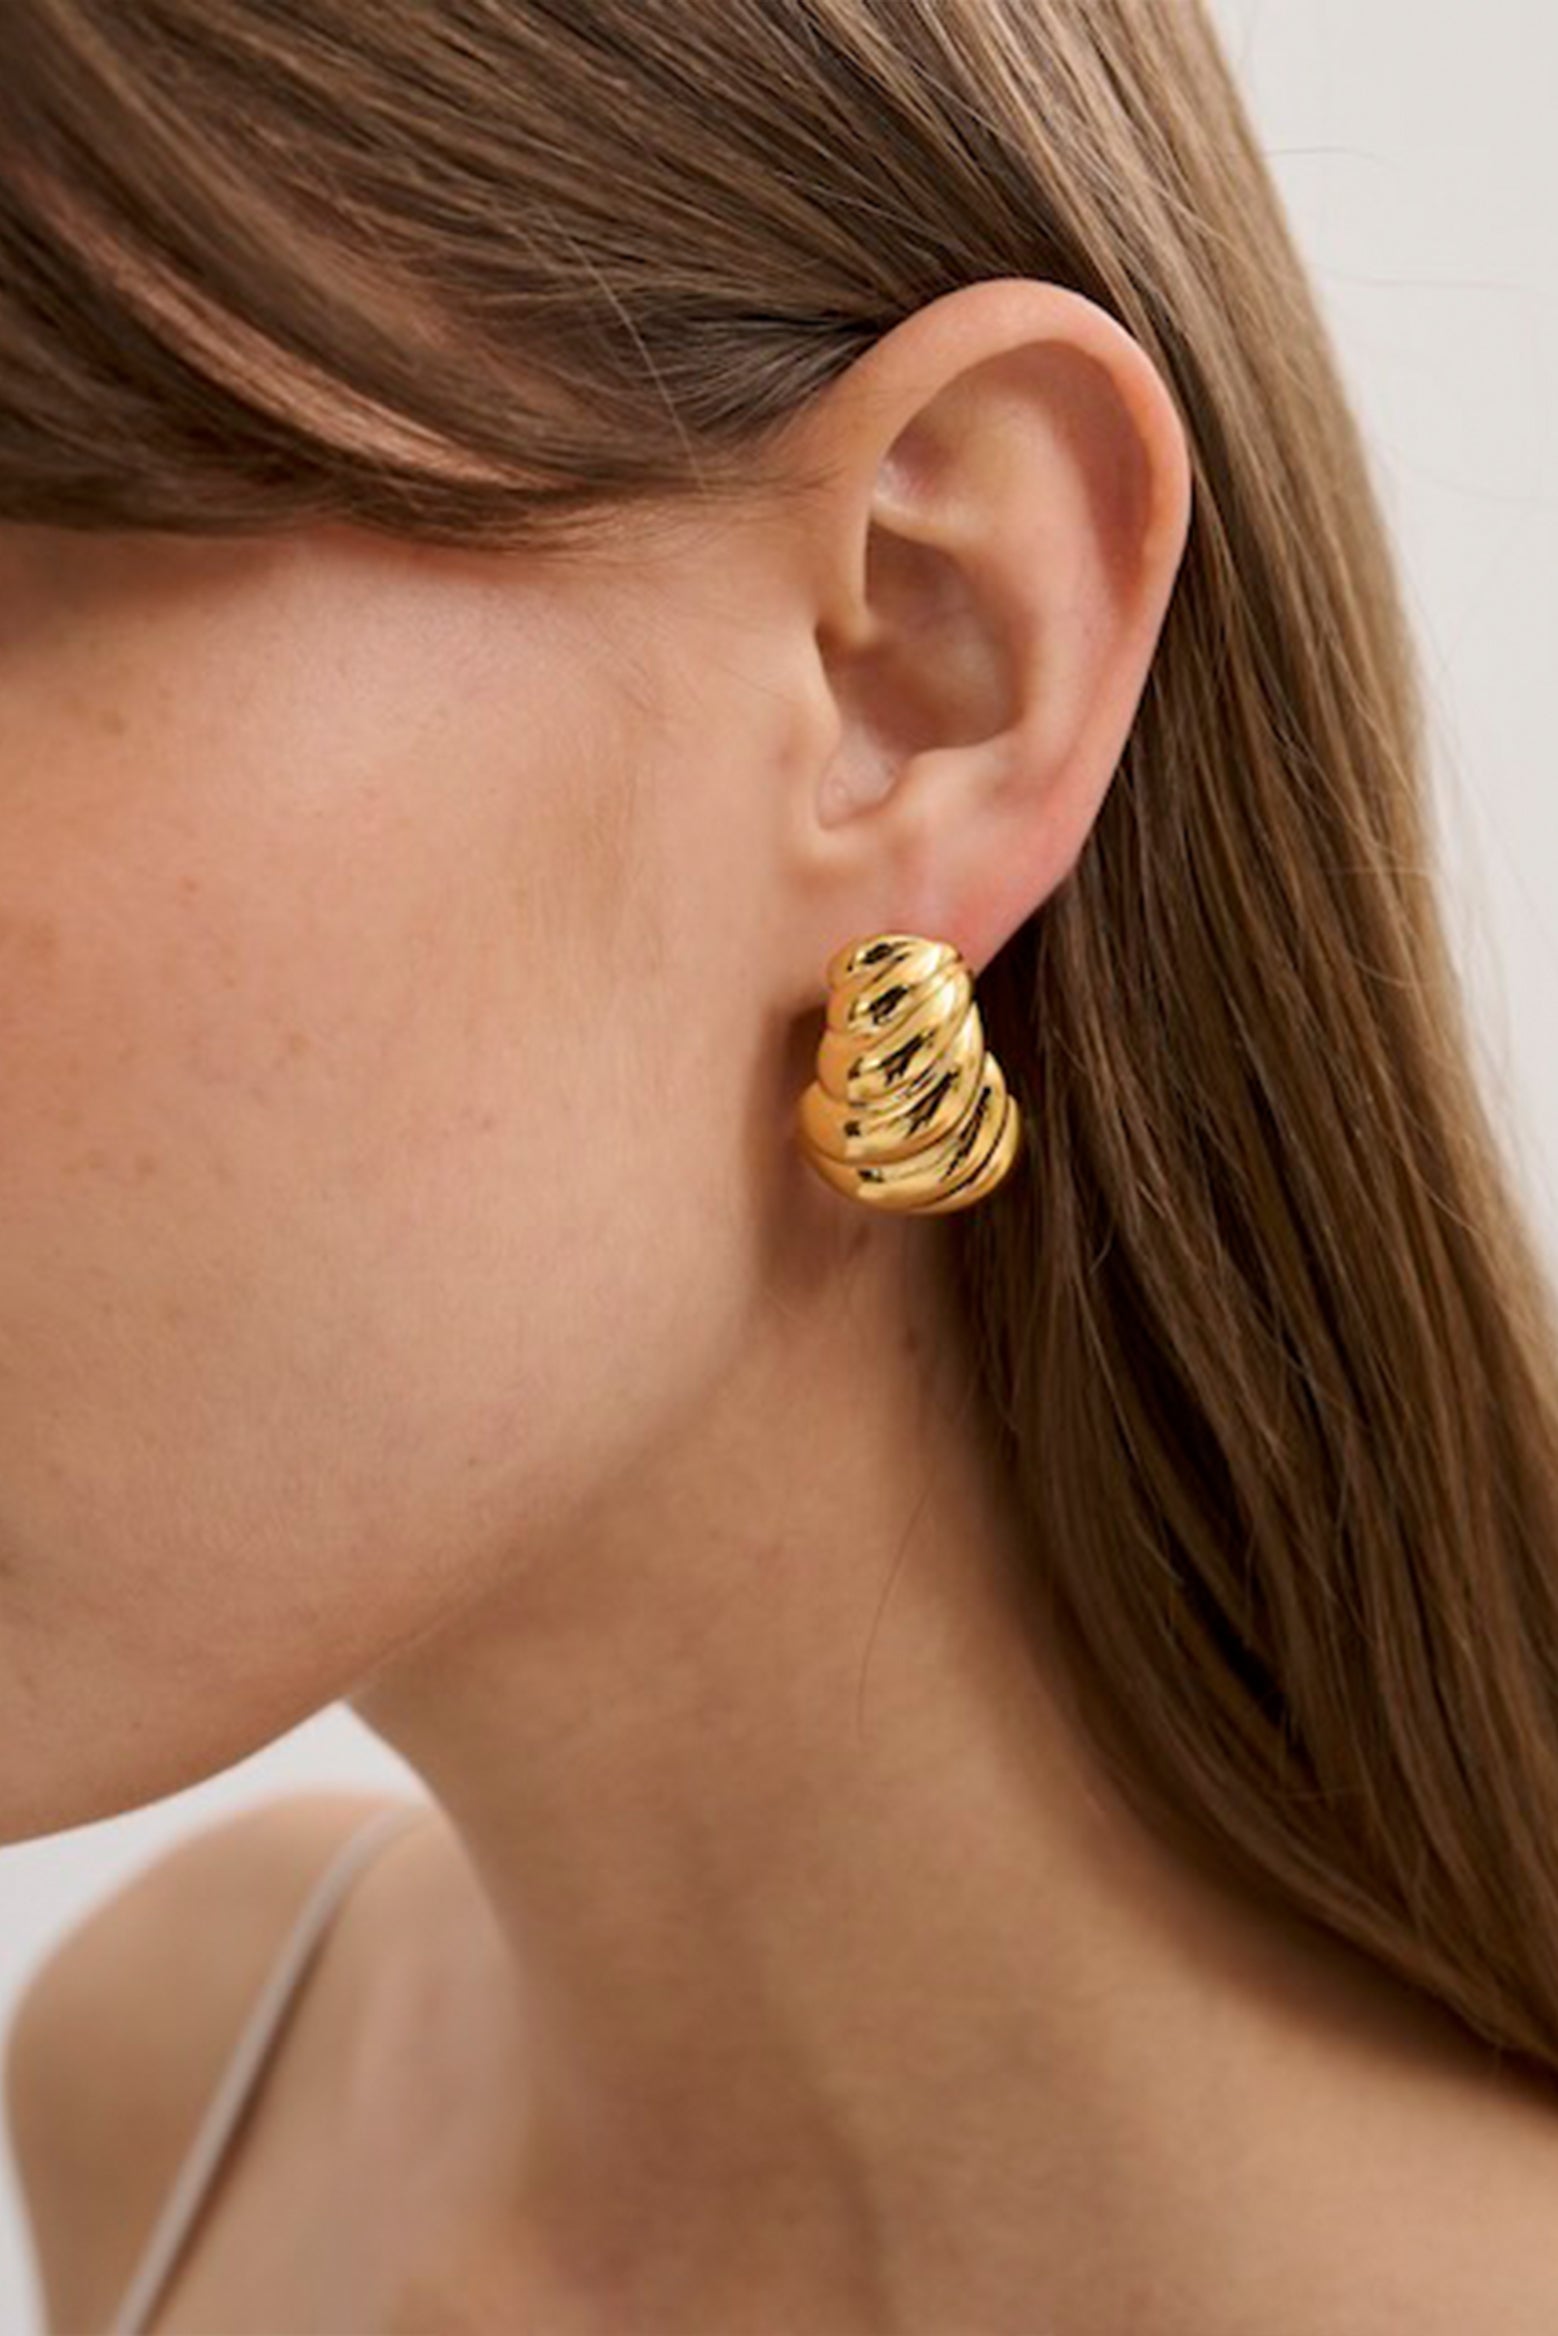 Anna Rossi Ascending Scallop Earring in Gold available at The New Trend Australia.